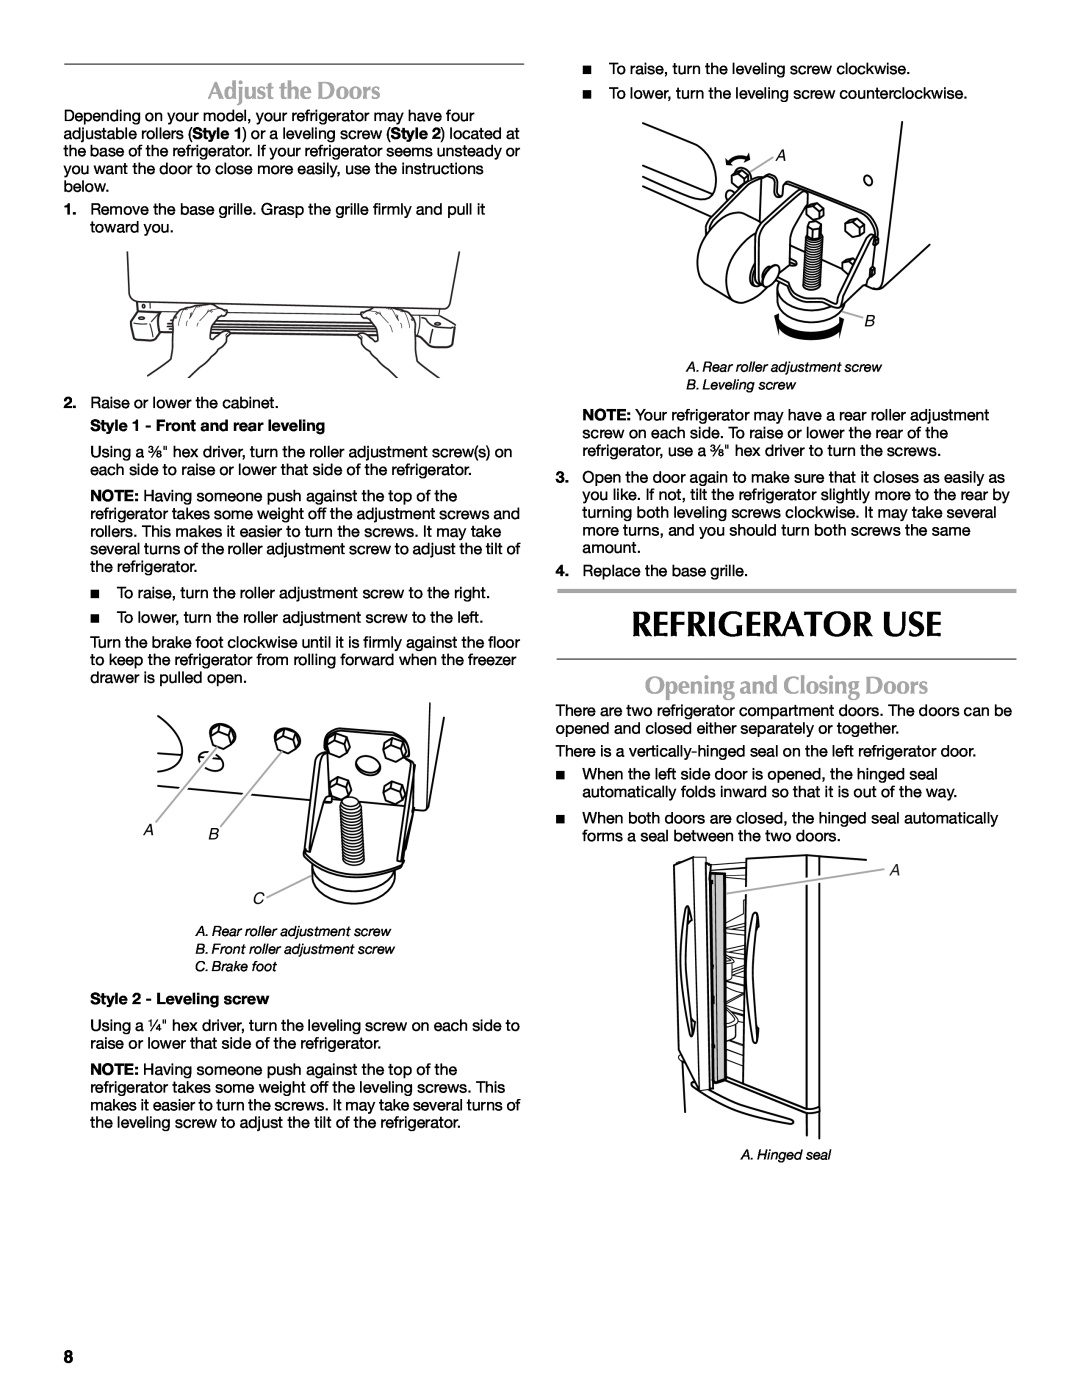 Maytag 12828190A, 12828186A installation instructions Refrigerator Use, Adjust the Doors, Opening and Closing Doors, A B C 